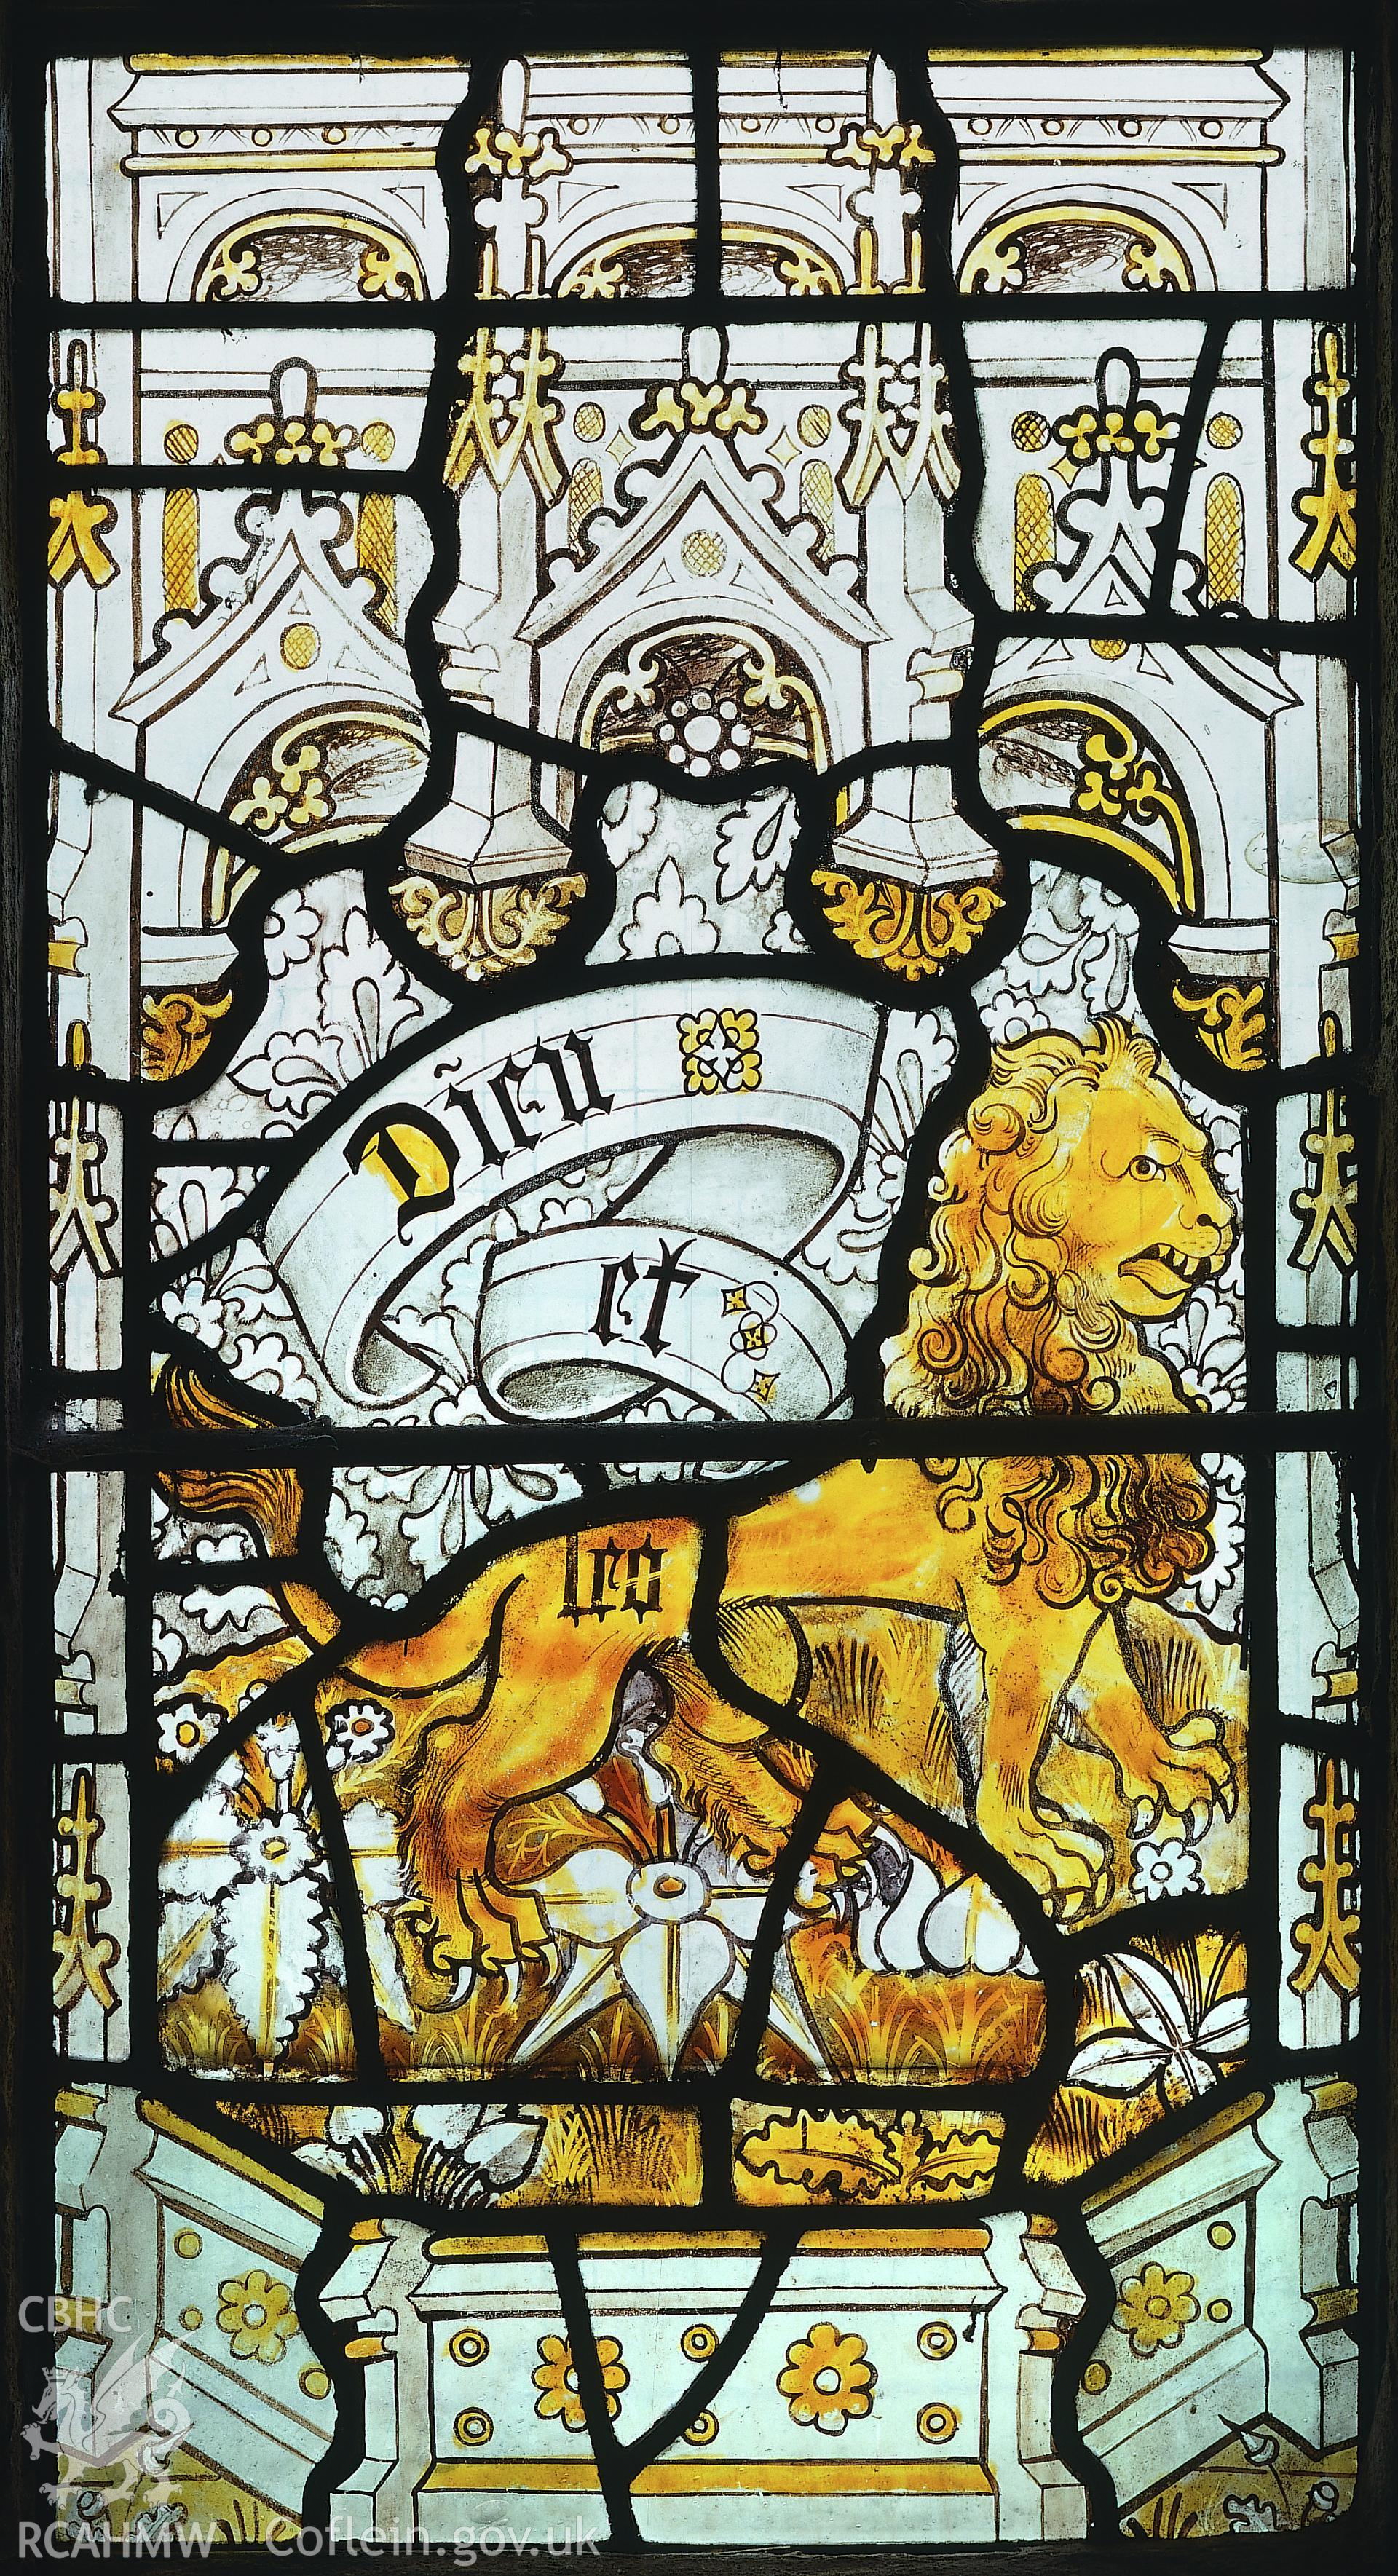 RCAHMW colour transparency of a stained glass window in  Nercwys Church, depicting a lion.